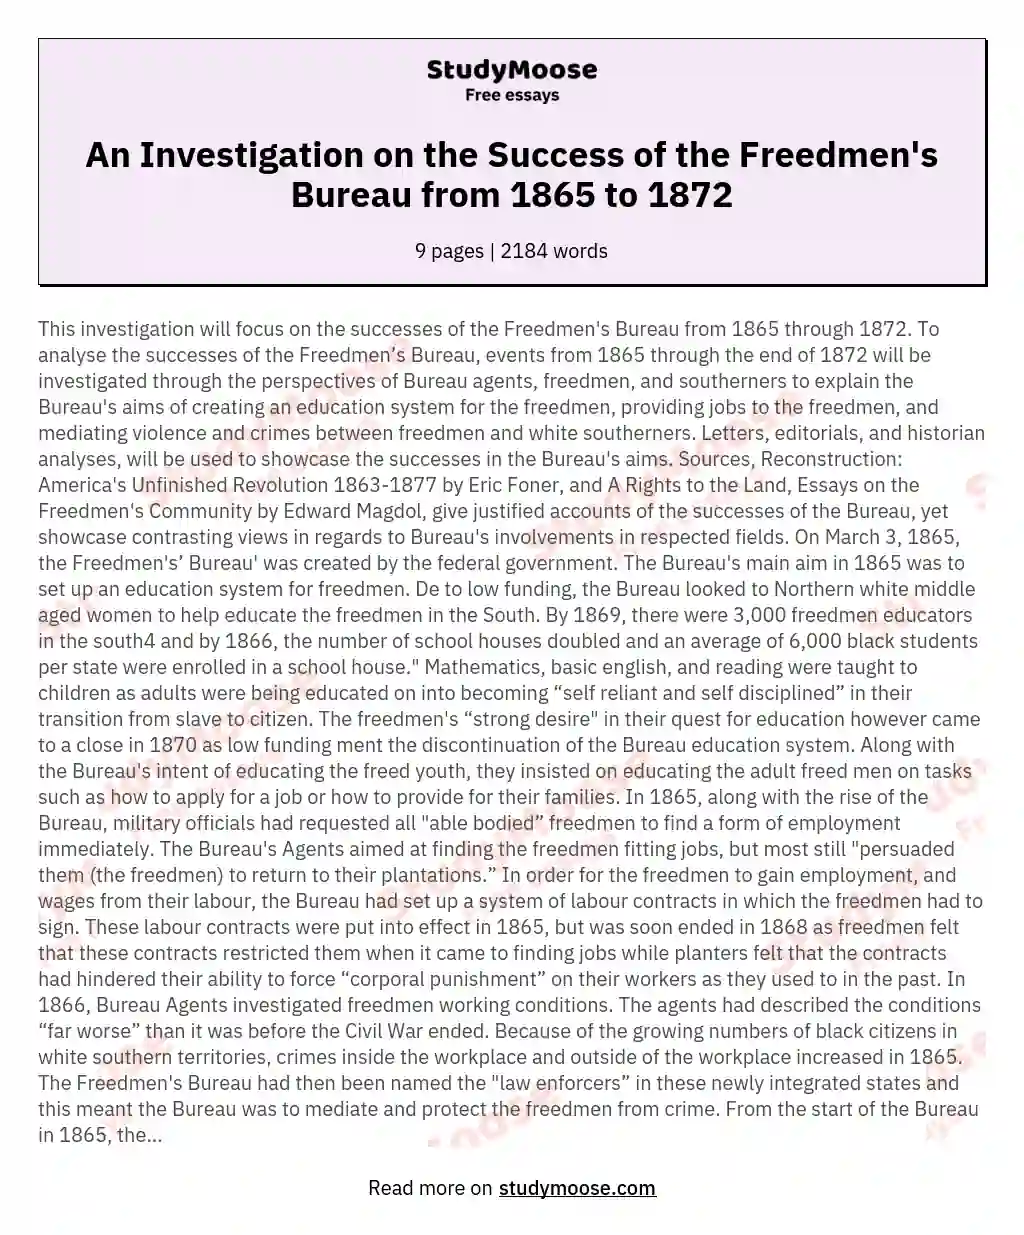 An Investigation on the Success of the Freedmen's Bureau from 1865 to 1872 essay